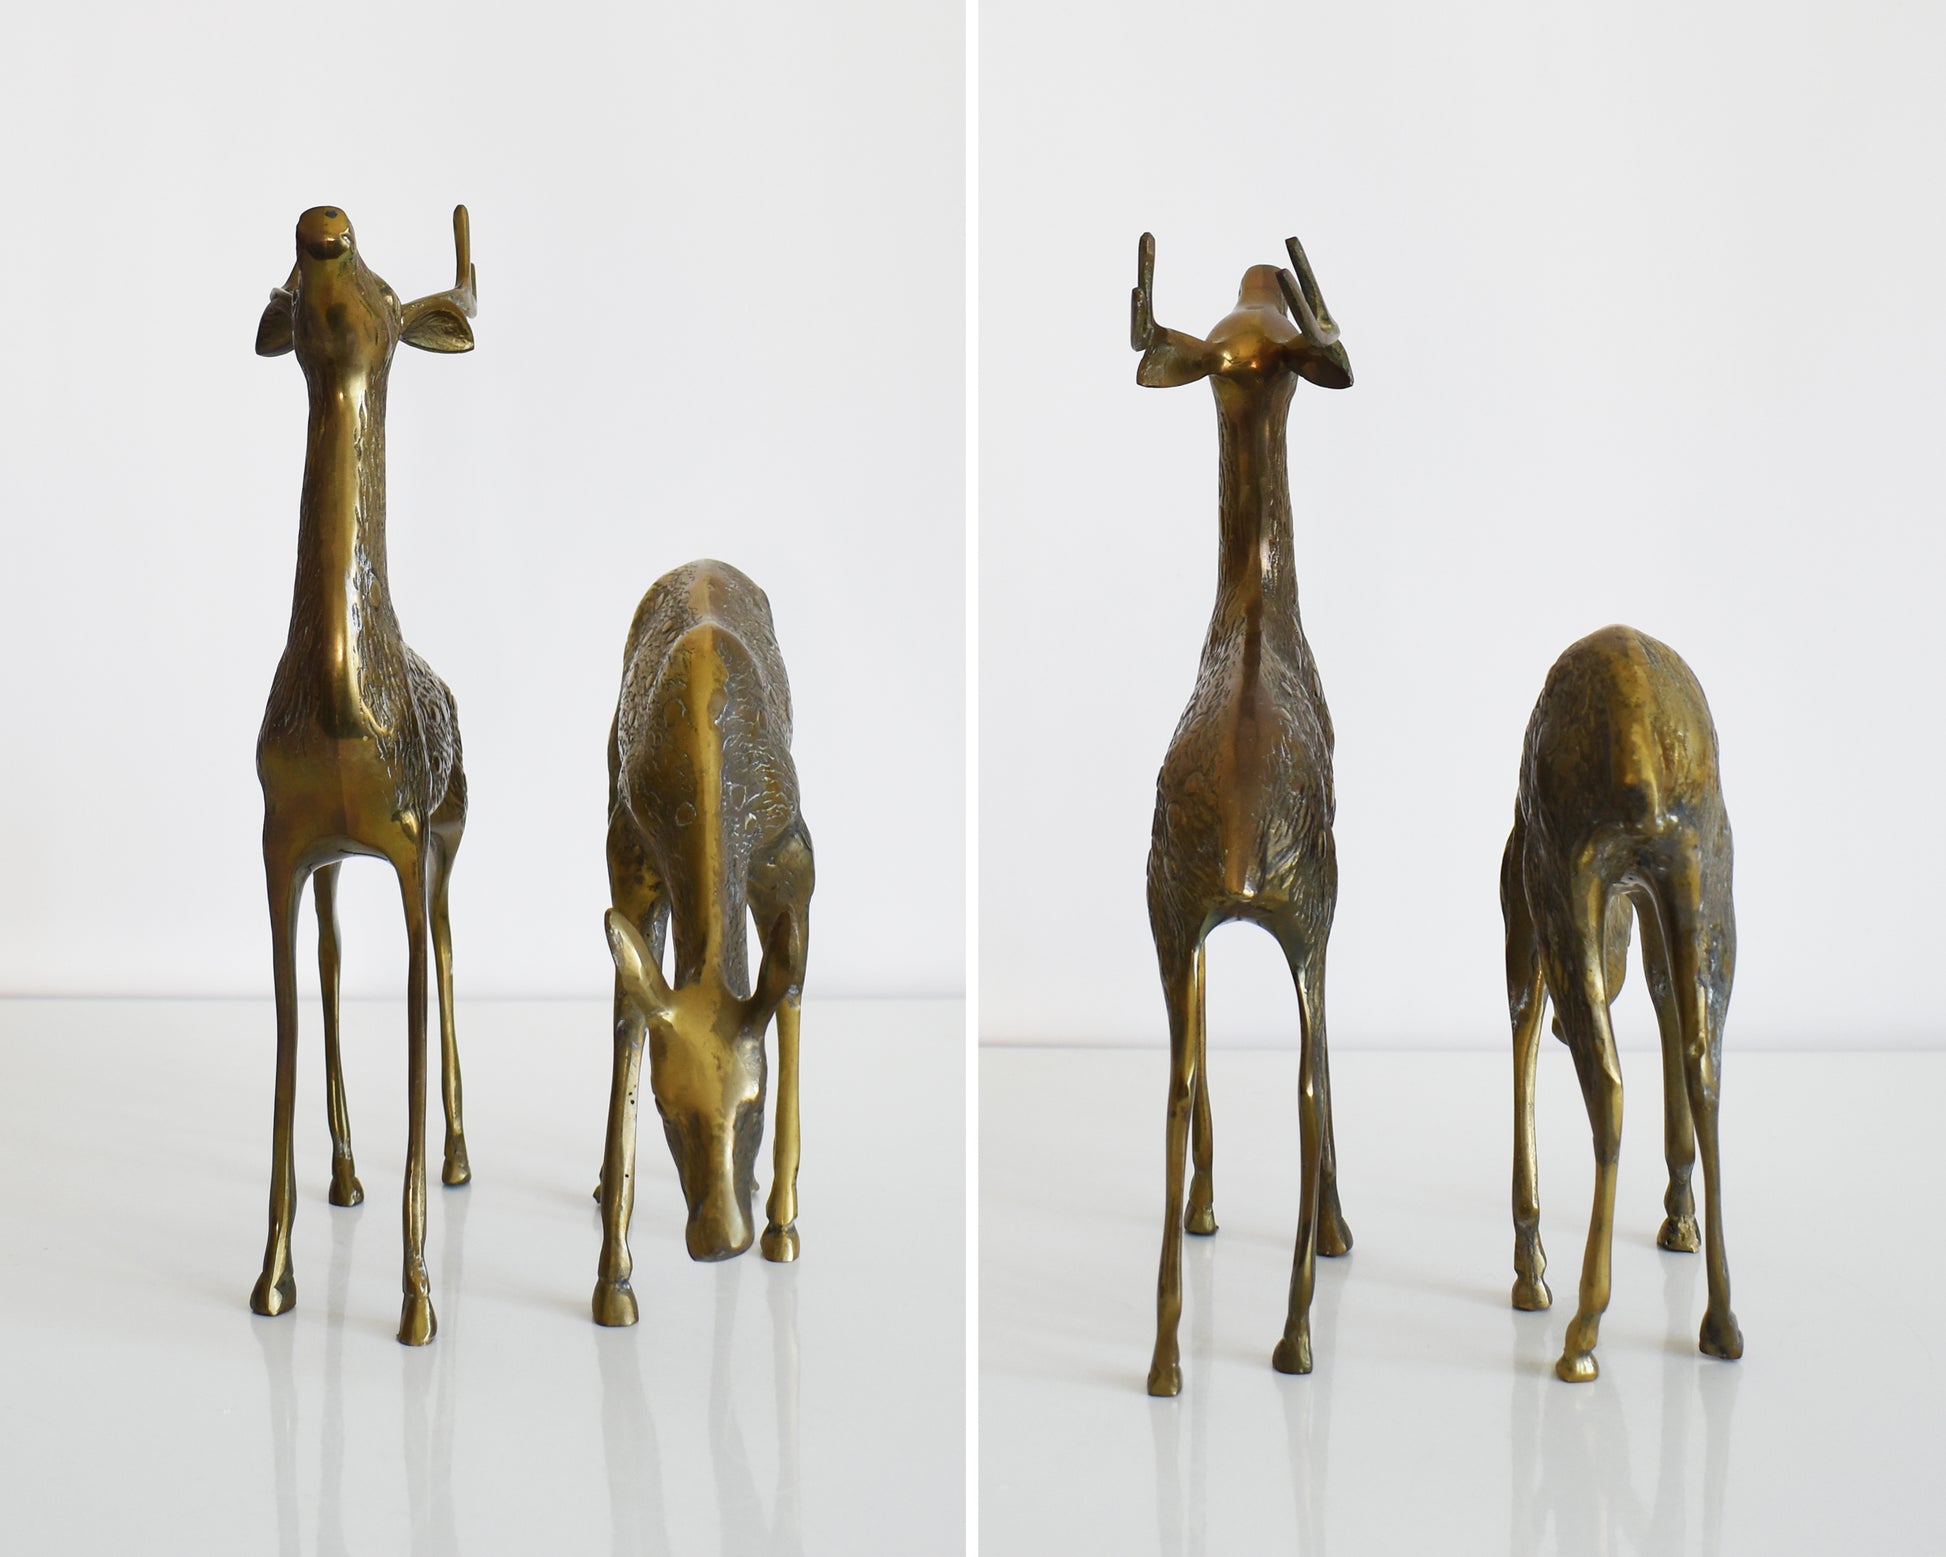 Side by side views of the front and back of the two brass deer